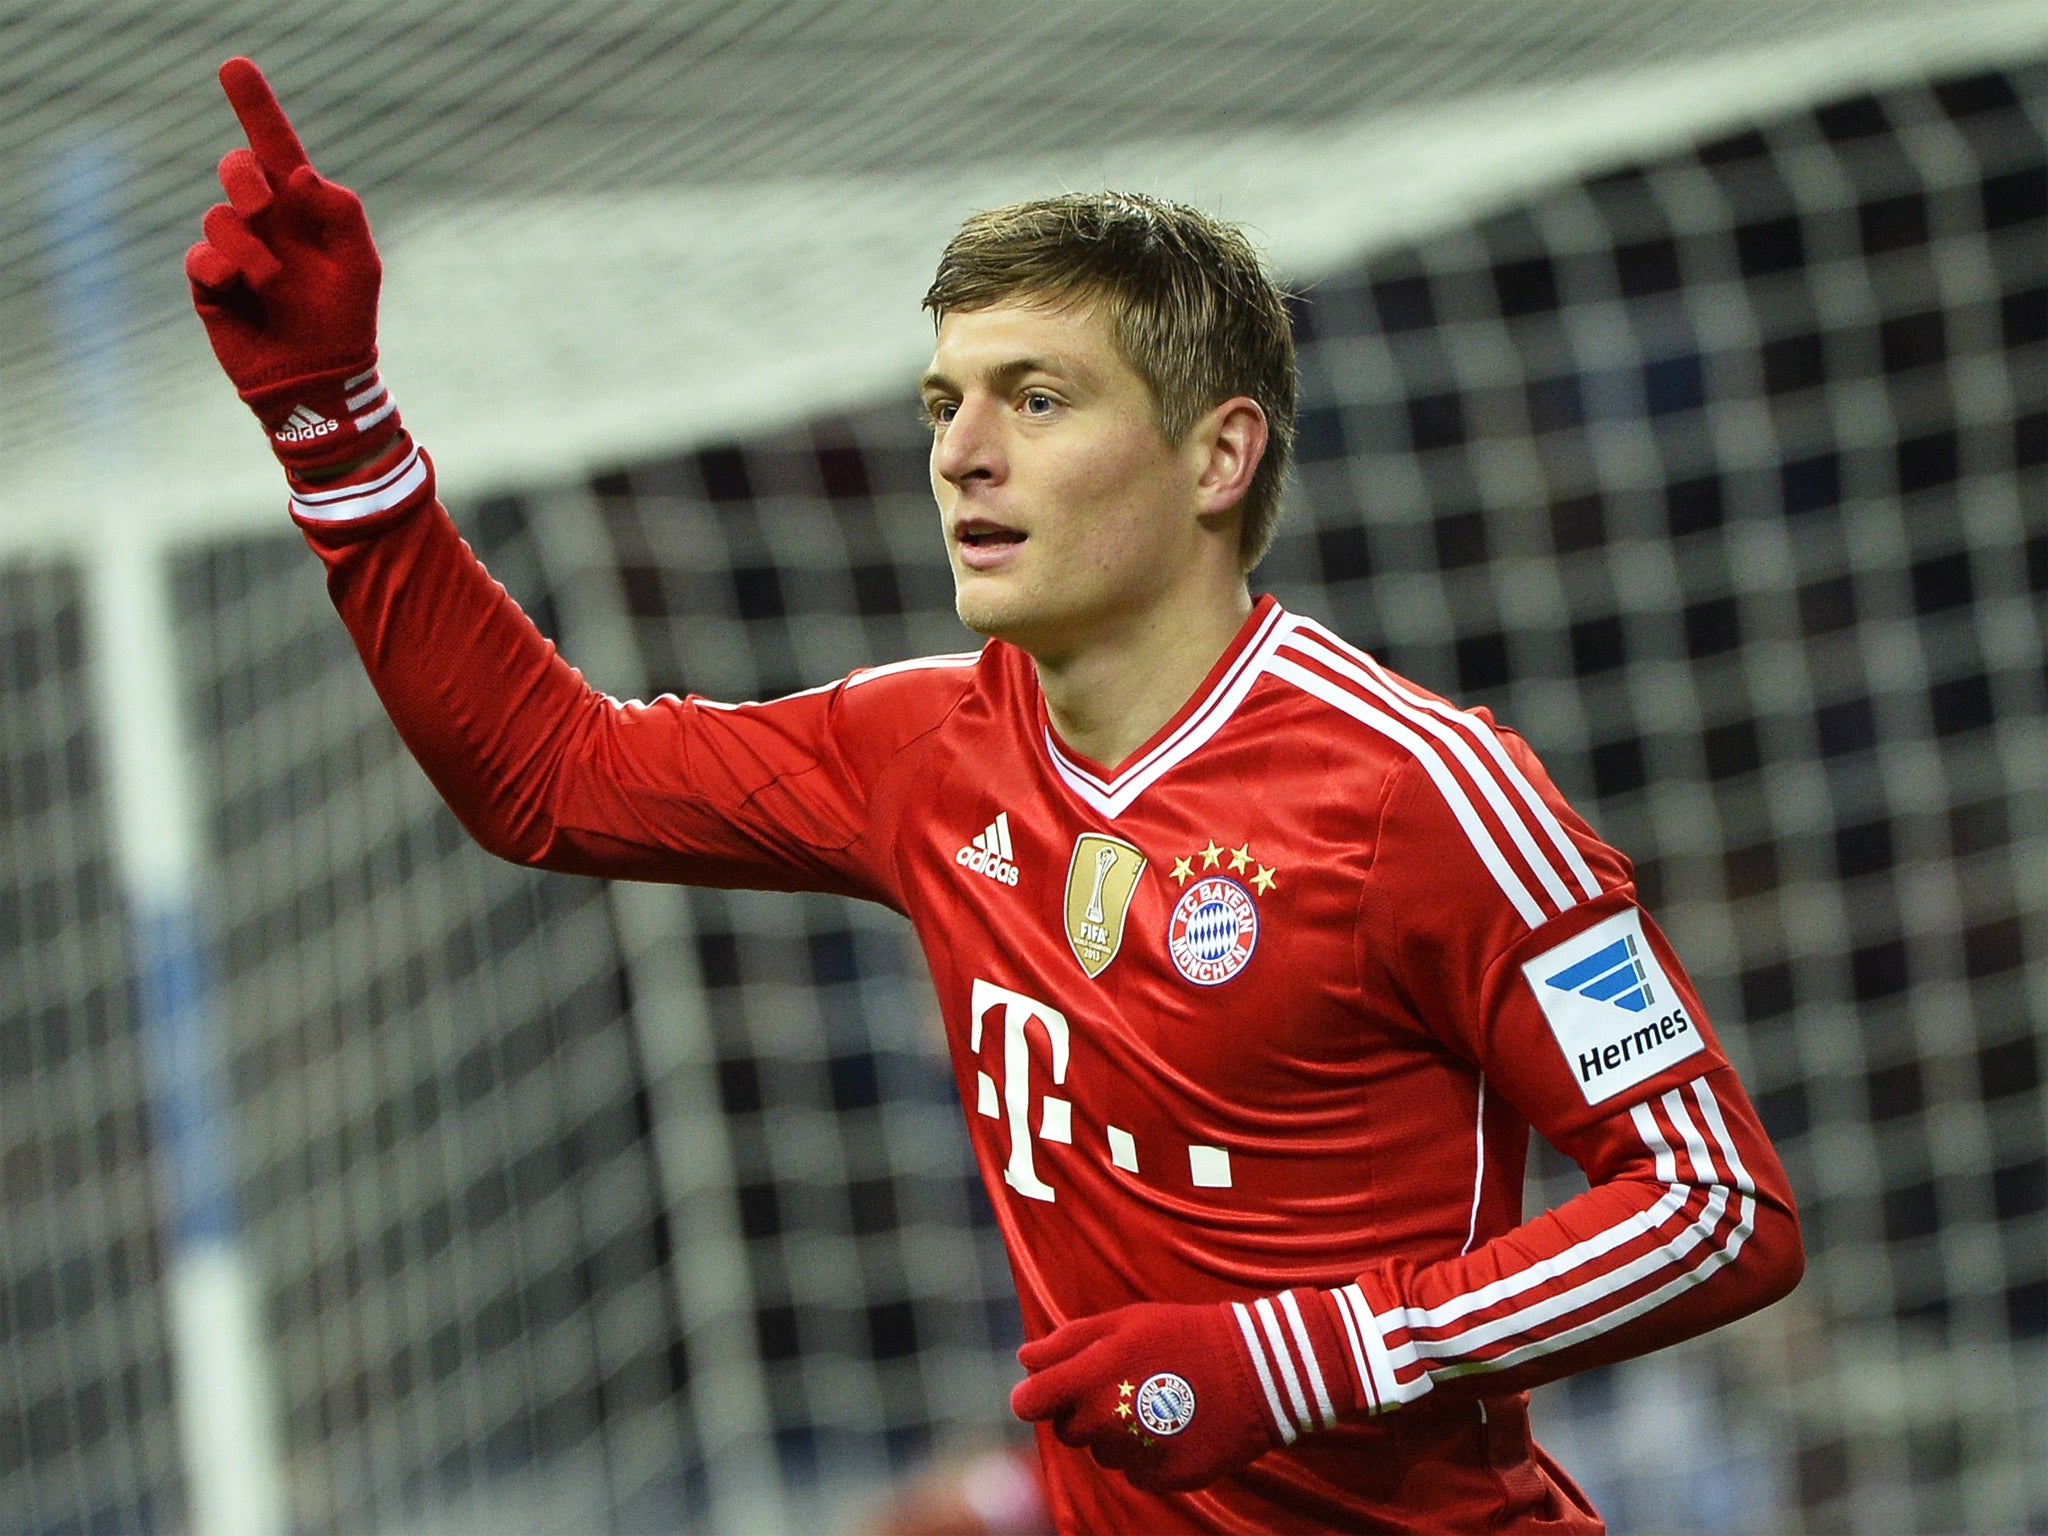 Bayern Munich's Toni Kroos is thought to be a target